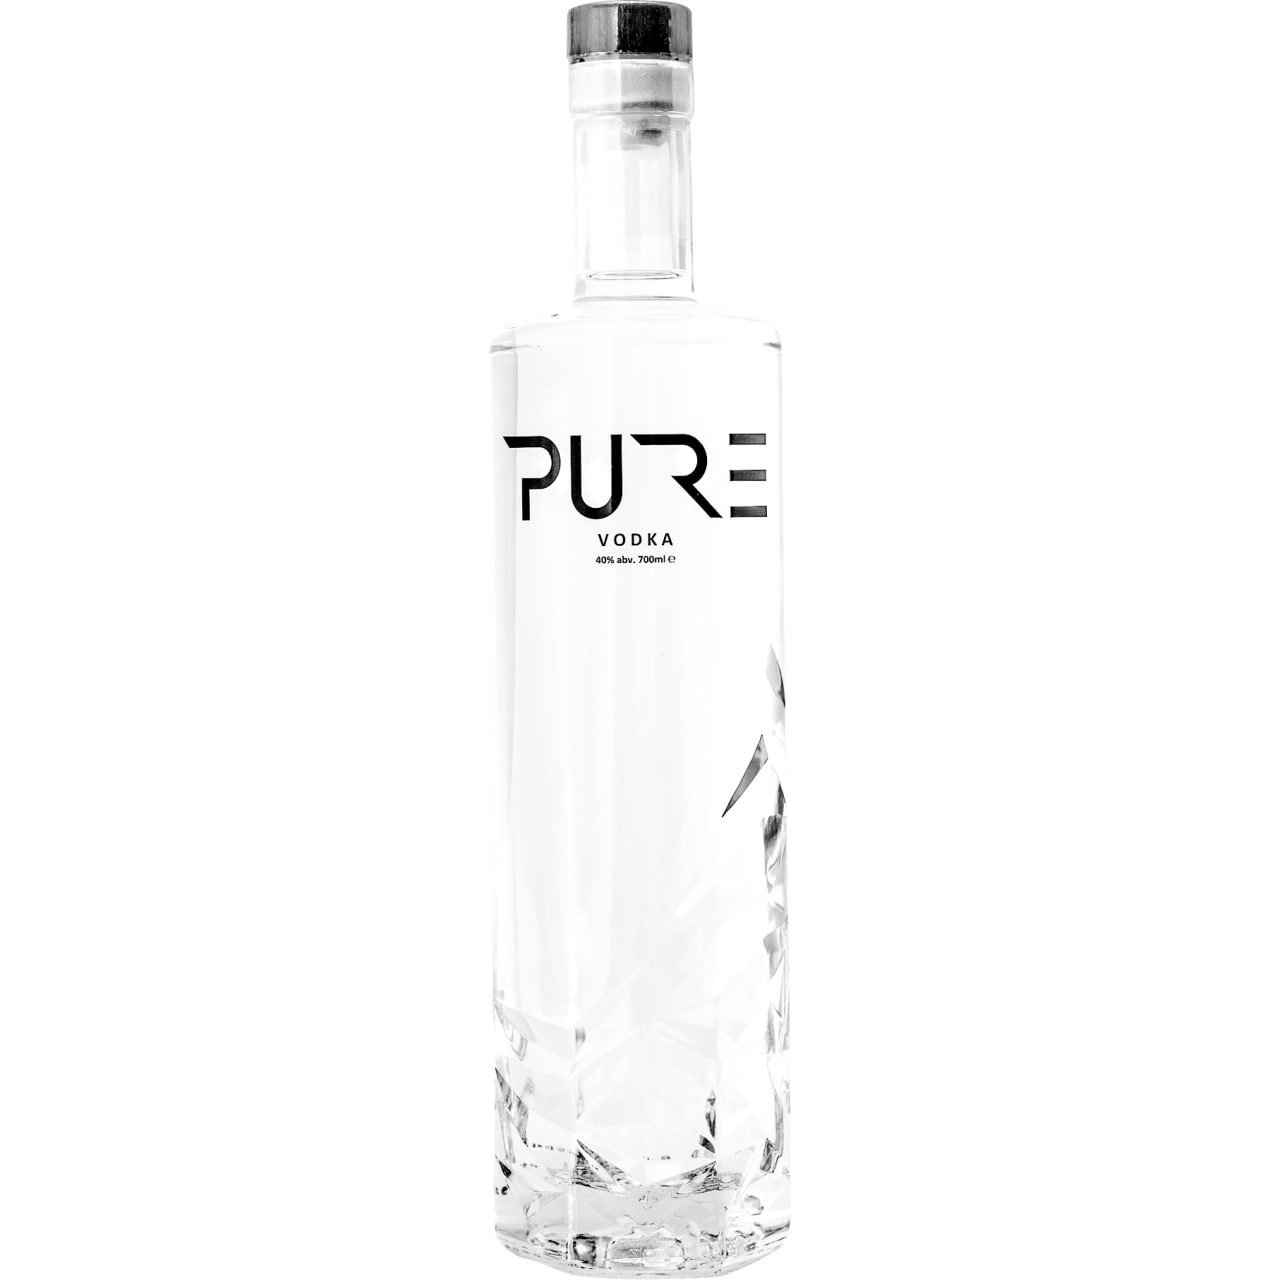 This organic vodka is a light, refreshing vodka, both smooth and slightly sweet on the palate. PURE uses only high-quality raw ingredients and owes its unique taste to the finest organic wheat it is derived from.